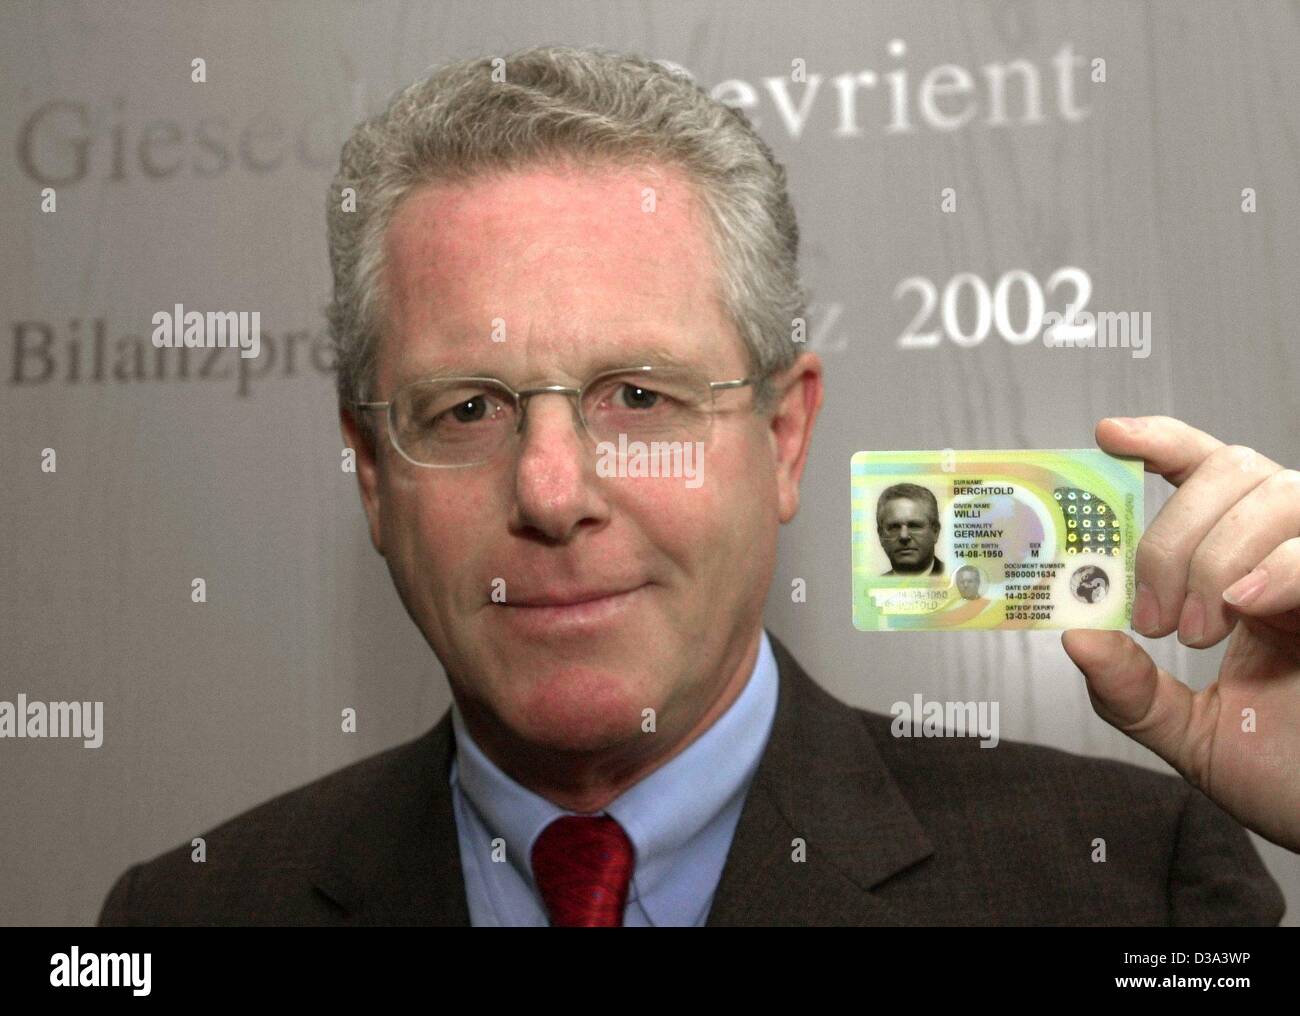 (dpa) - Willi Berchthold CEO of banknote printing and <b>chip card</b> group ... - dpa-willi-berchthold-ceo-of-banknote-printing-and-chip-card-group-D3A3WP